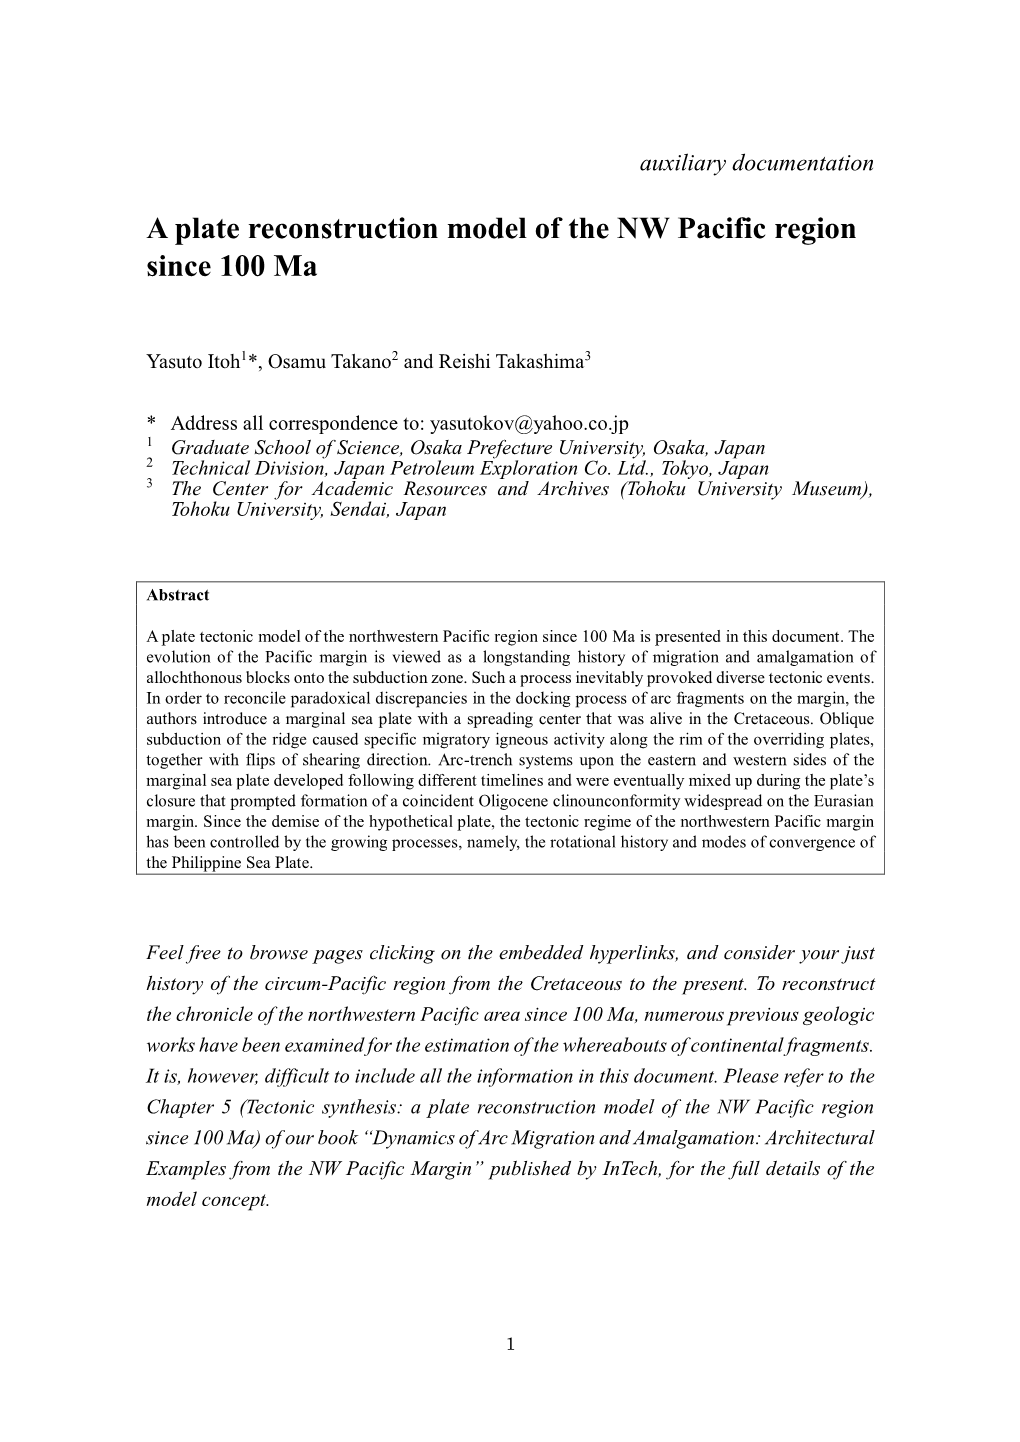 A Plate Reconstruction Model of the NW Pacific Region Since 100 Ma